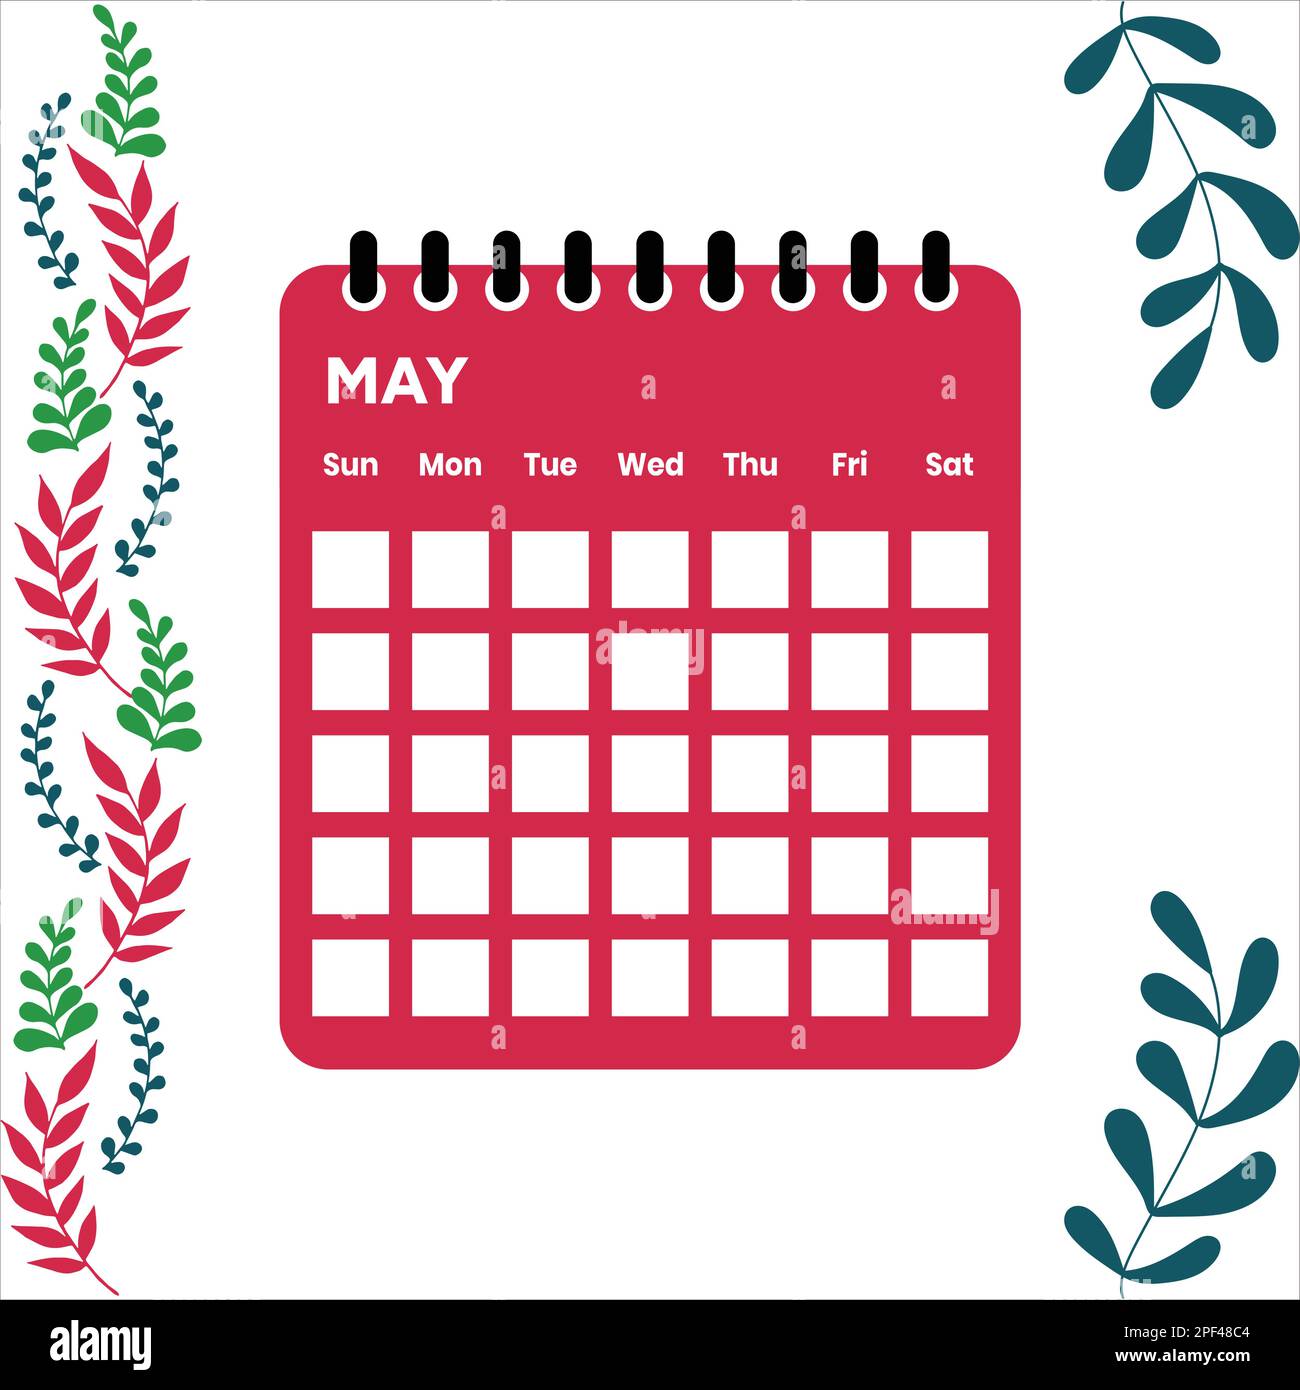 months of the year calendar clipart